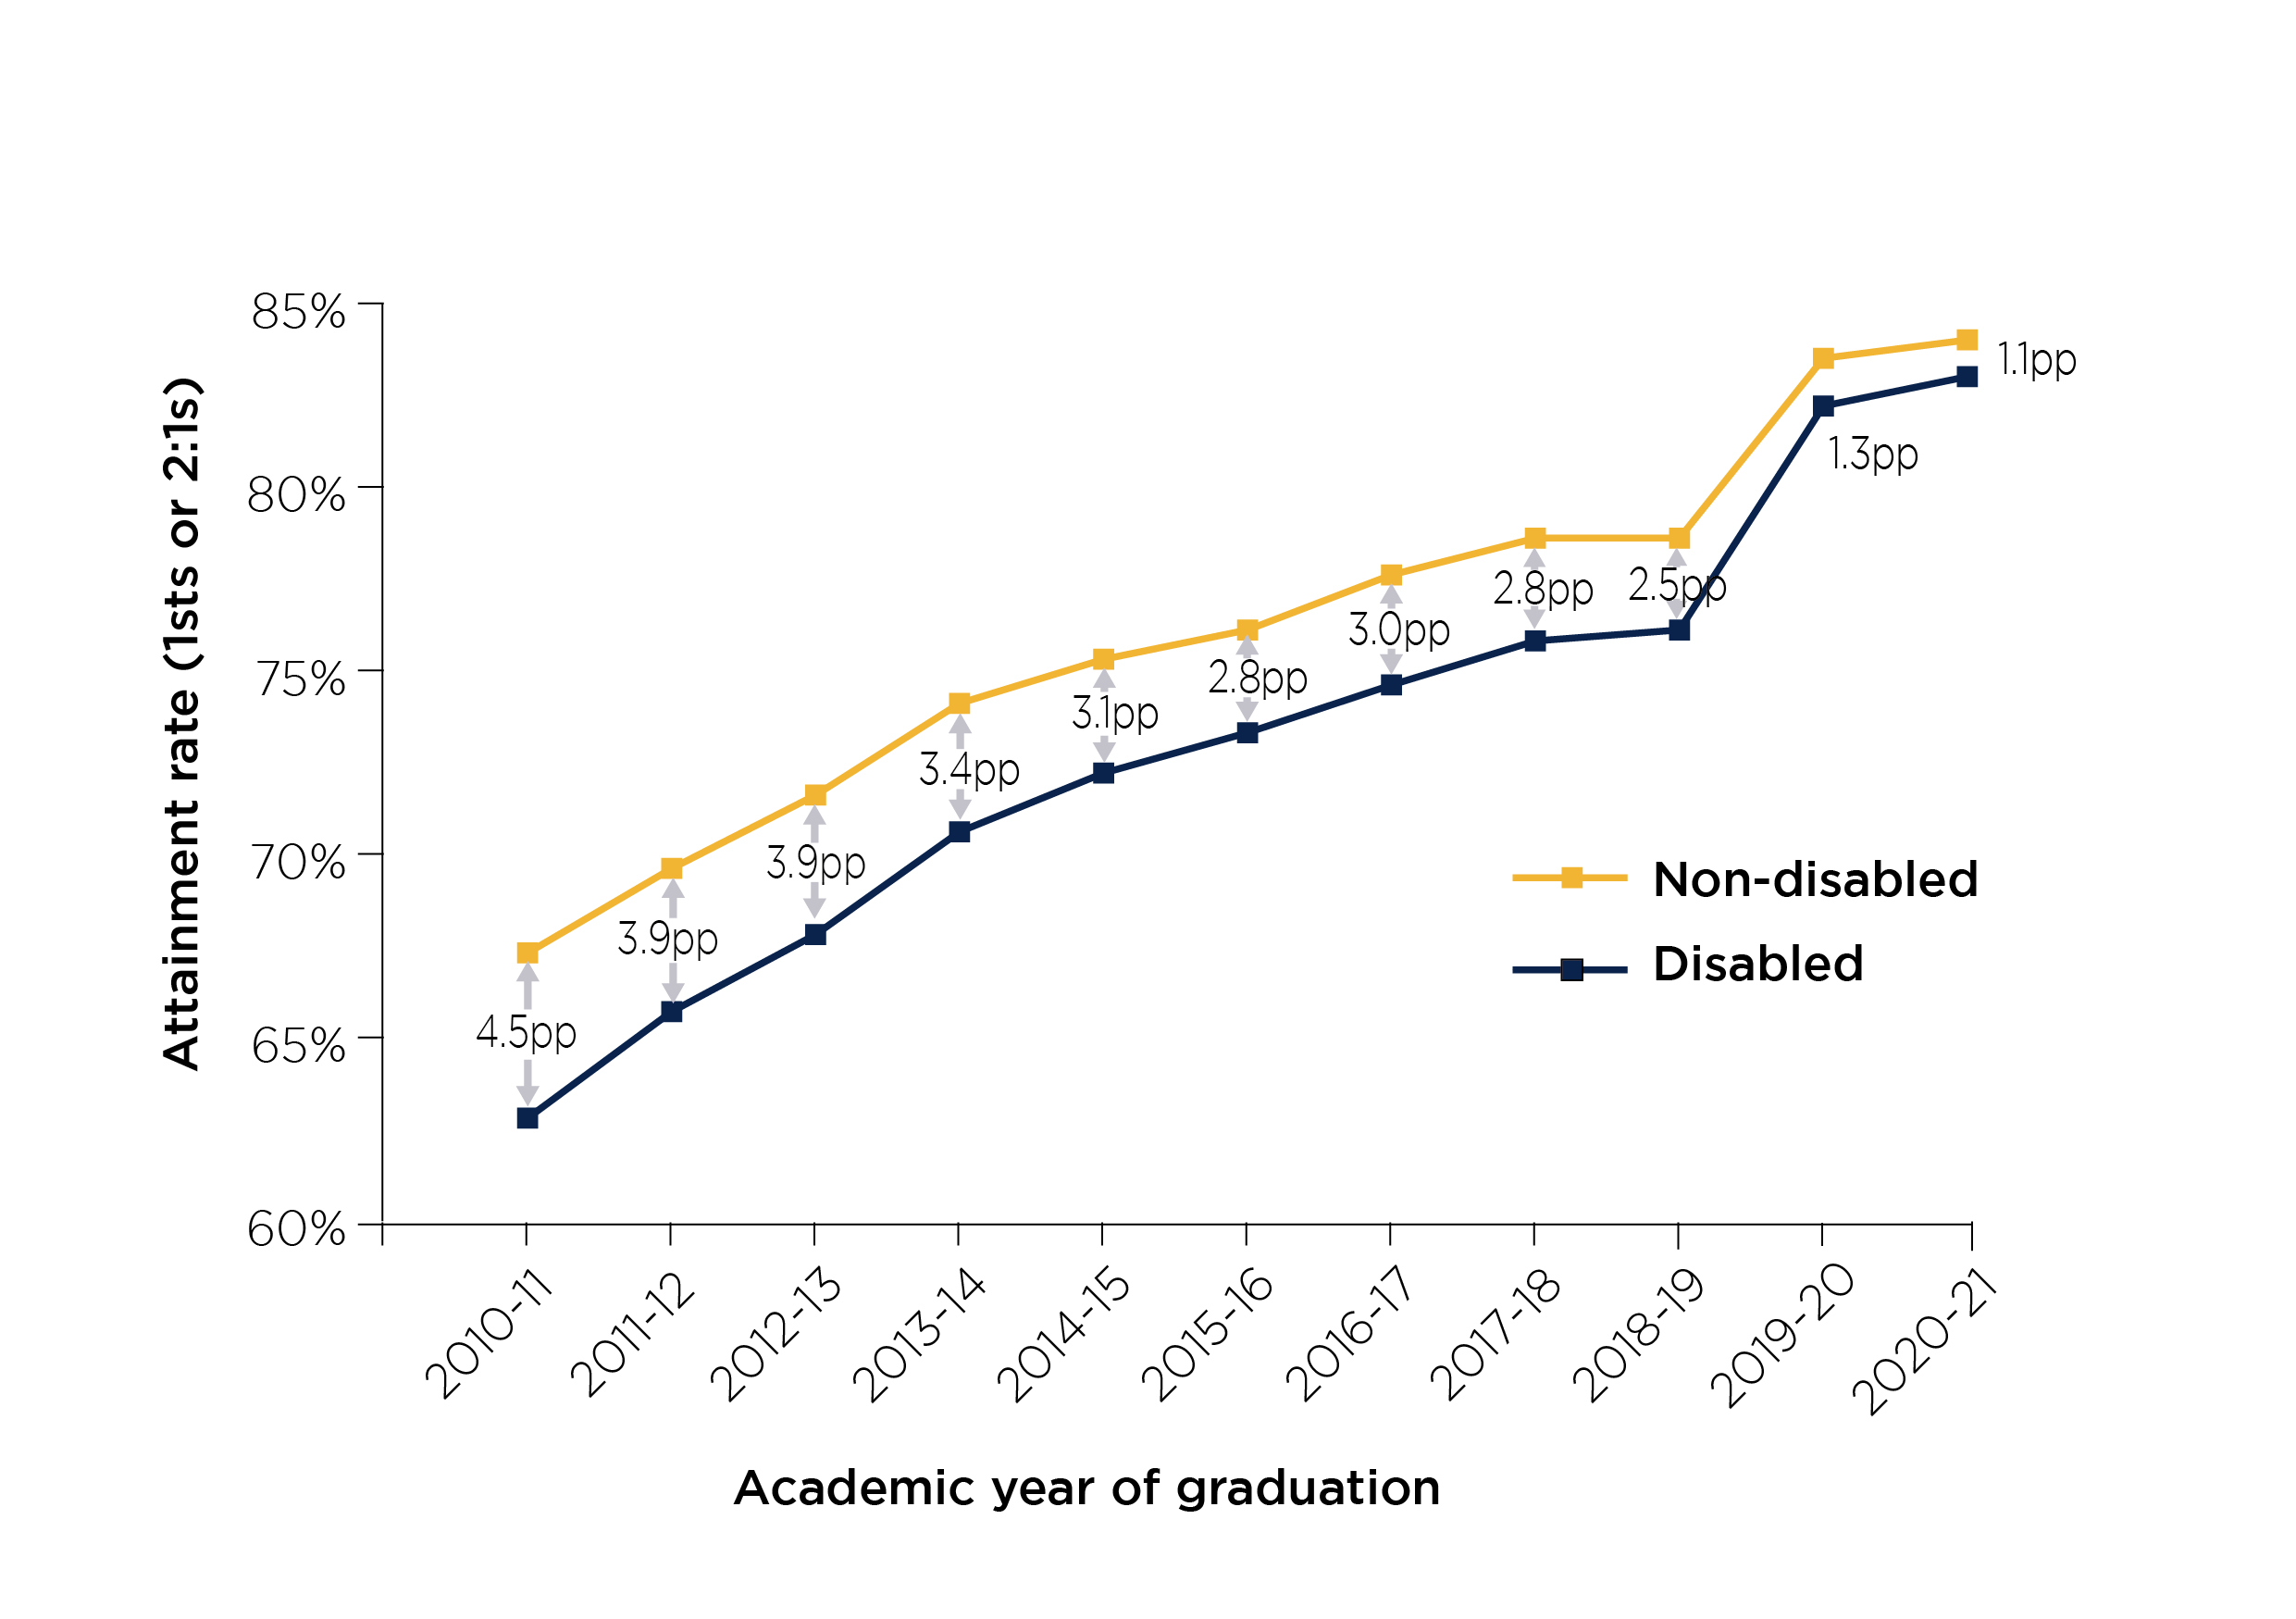 Figure 3: Gap in degree outcomes (1sts or 2:1s) between disabled and non-disabled students